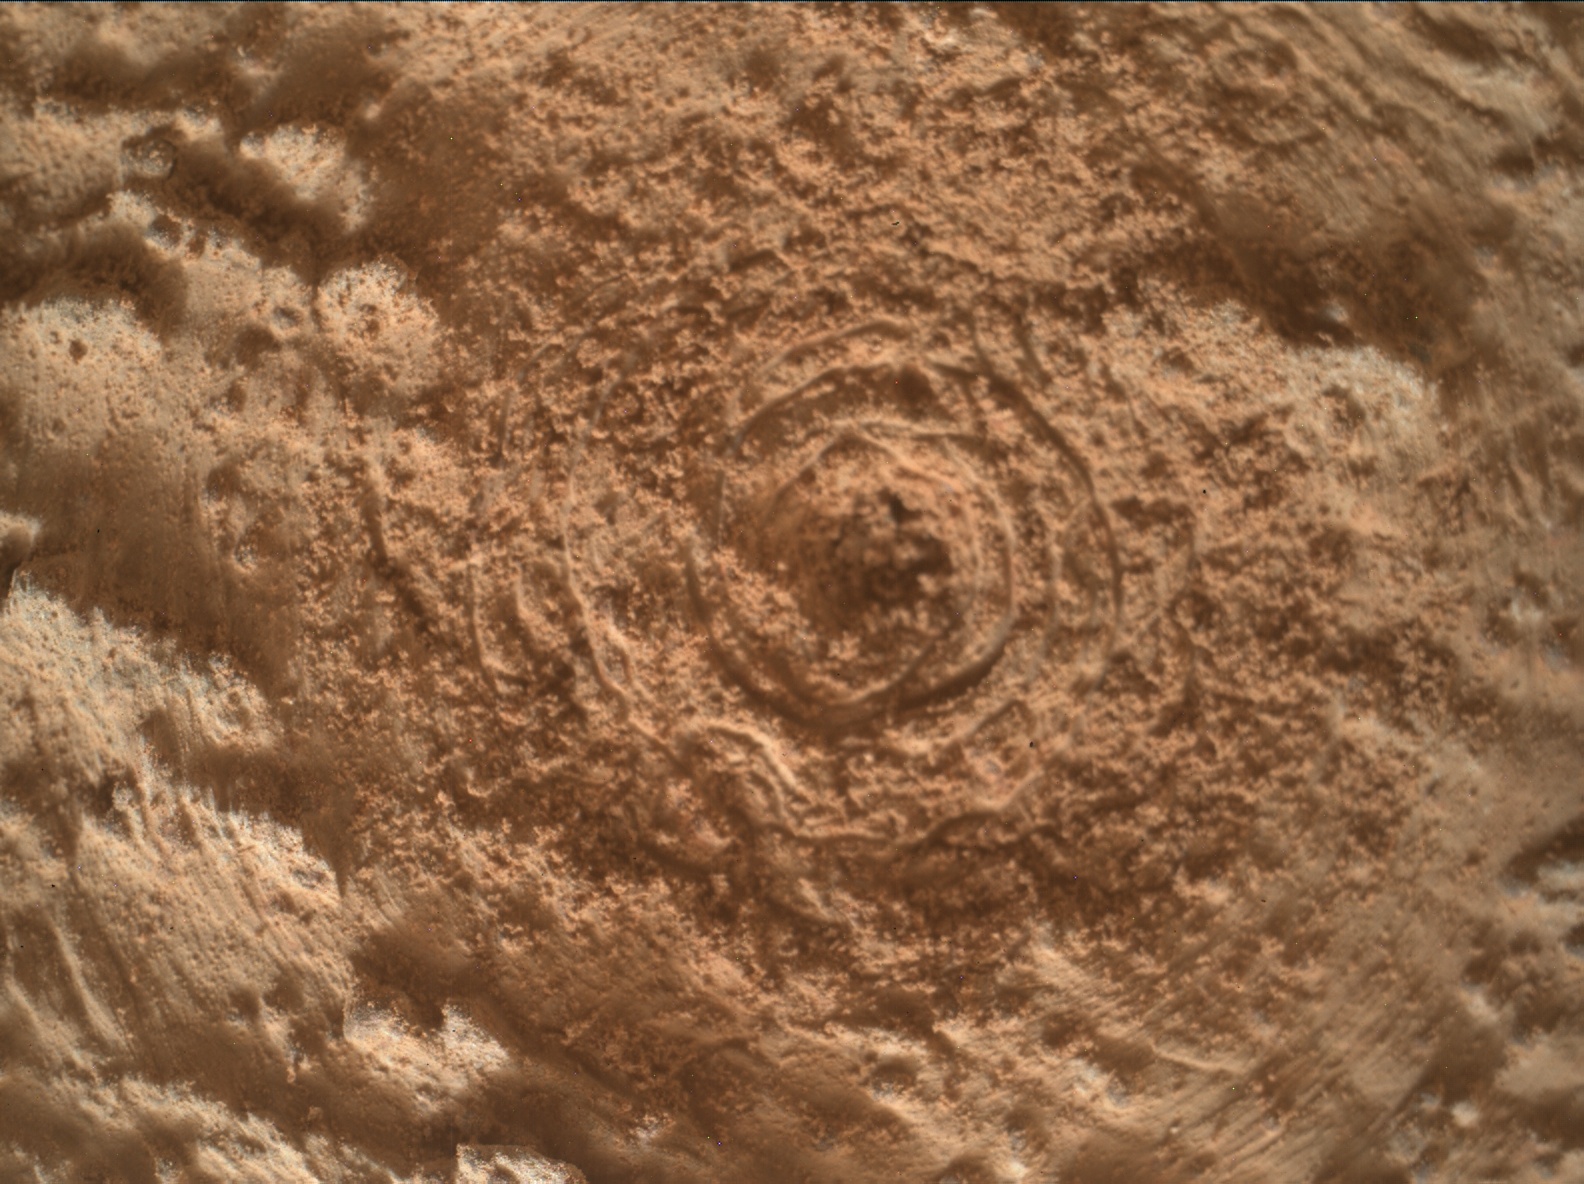 Nasa's Mars rover Curiosity acquired this image using its Mars Hand Lens Imager (MAHLI) on Sol 3480